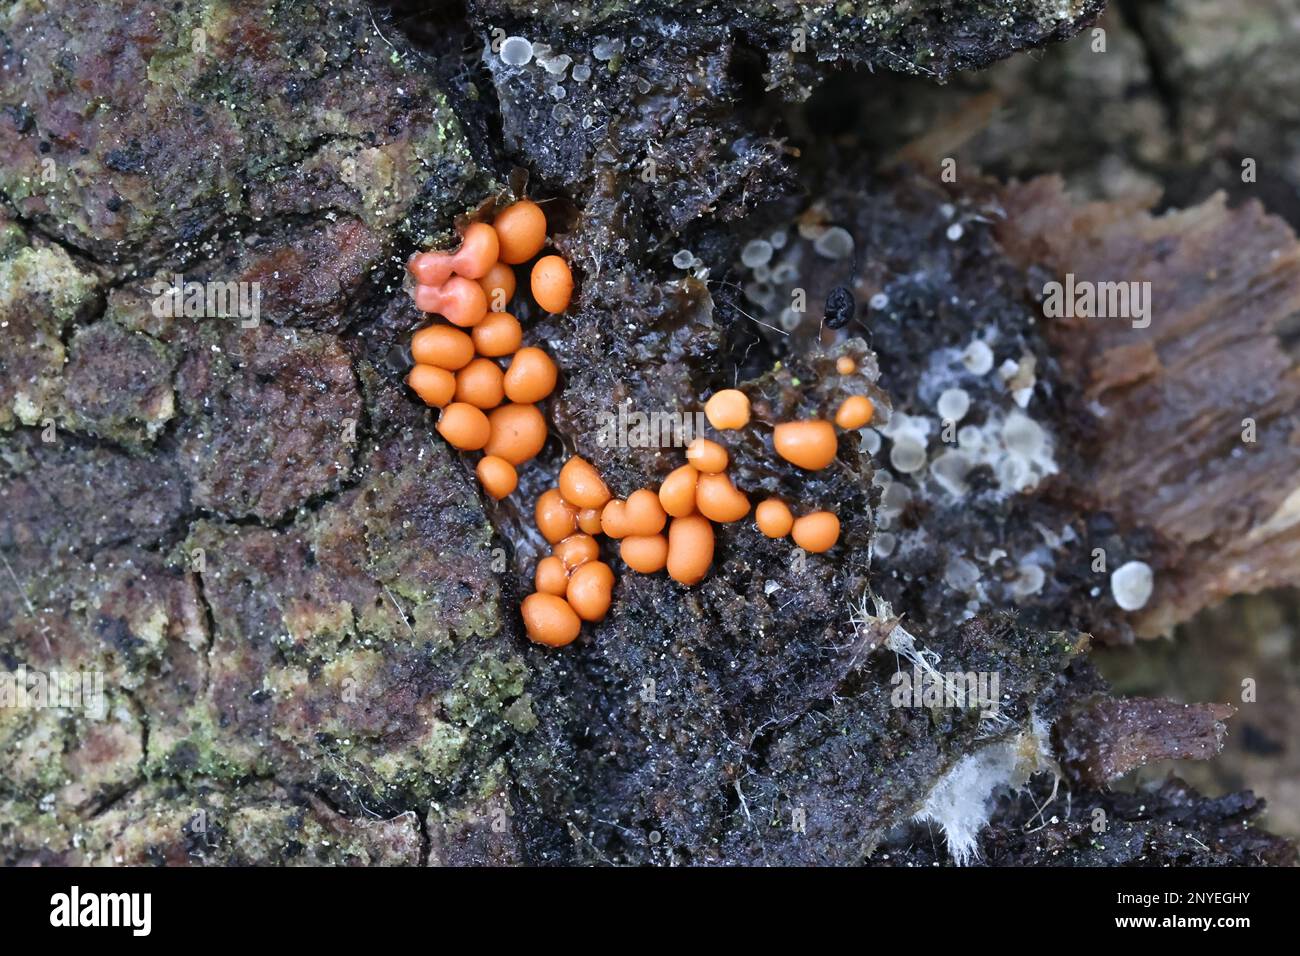 Trichia contorta, slime mold from Finland, no common English name Stock Photo